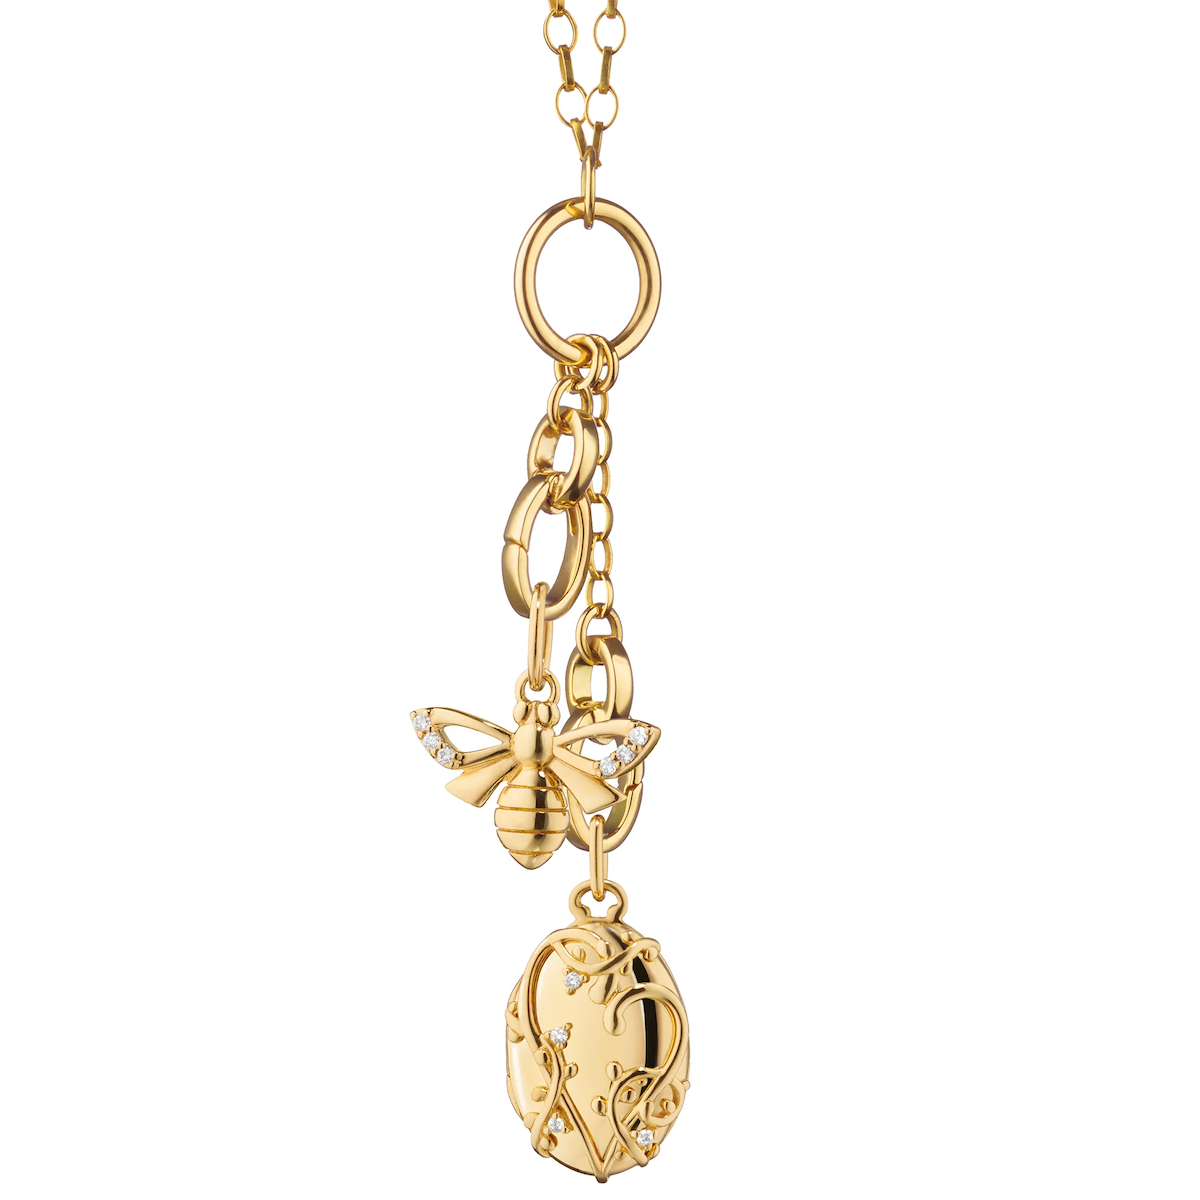 The “Wisteria” Locket and “Bee” 18K Gold Charm Necklace